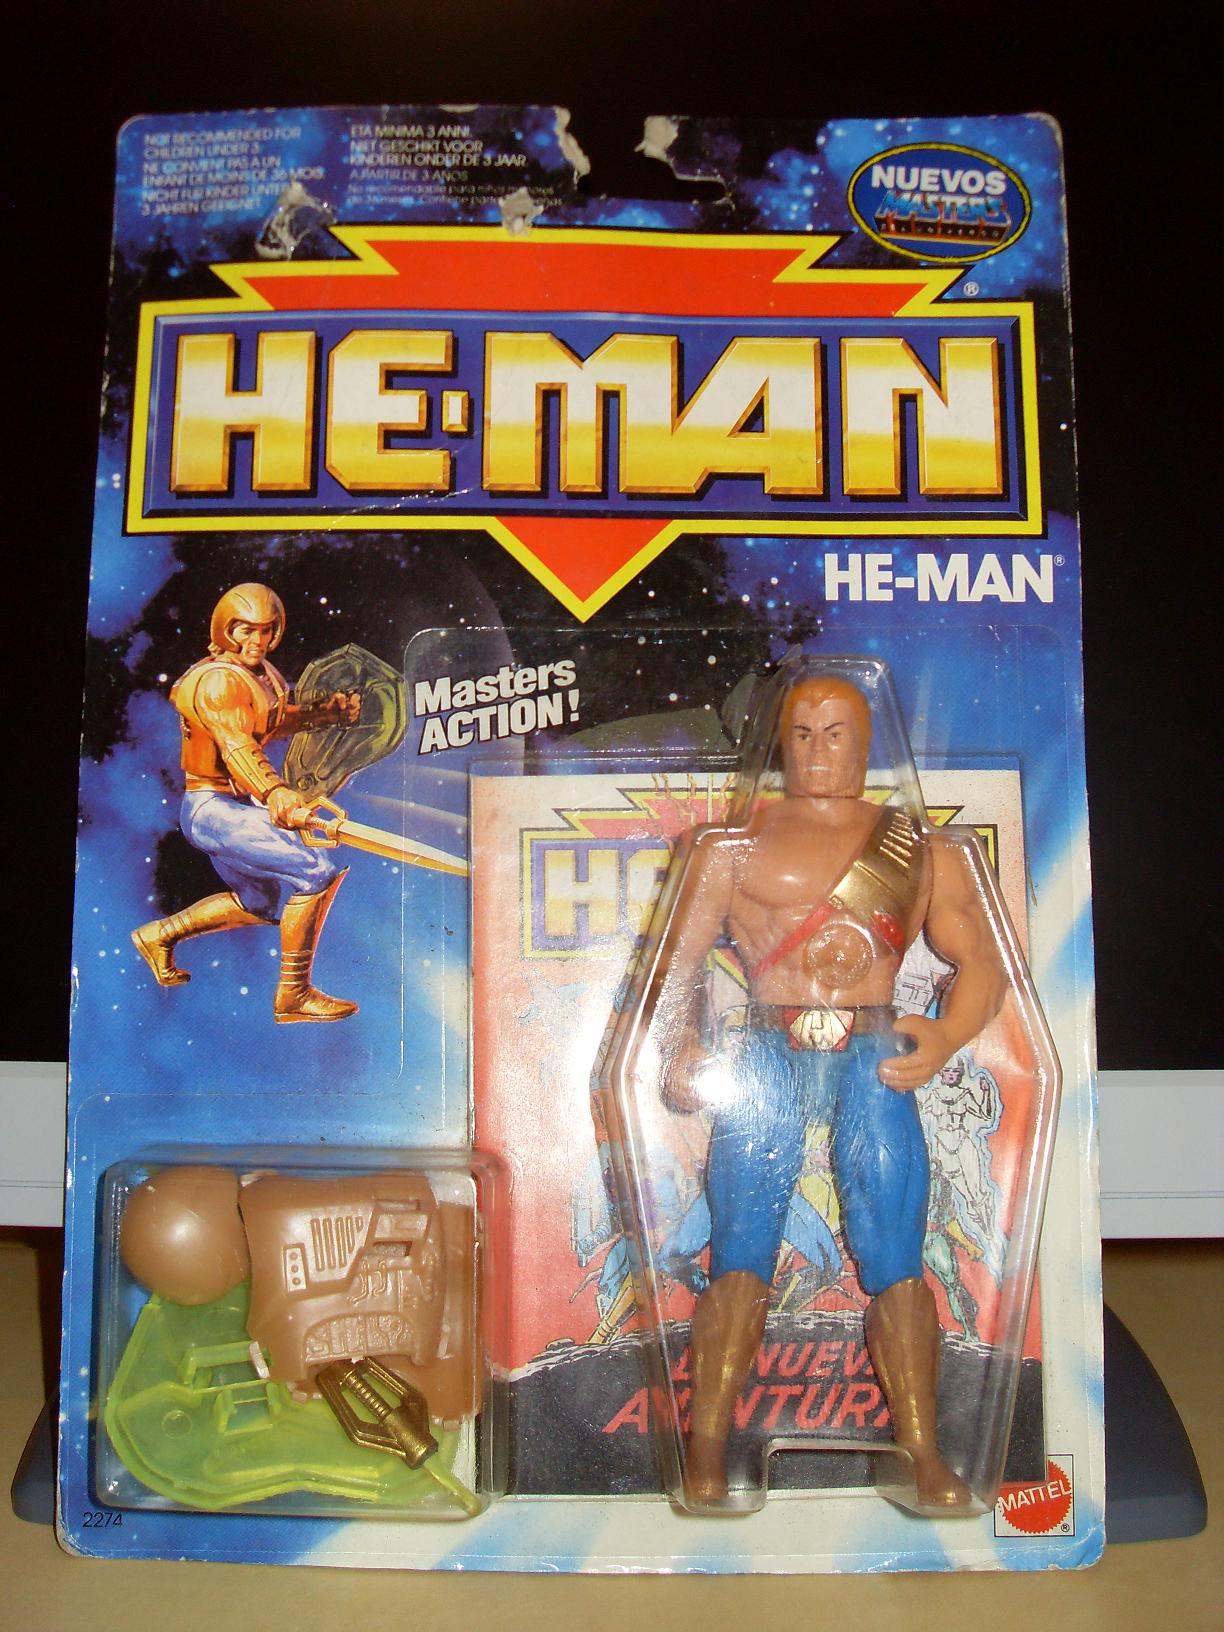 LORD HE-MAN Colecction 8371